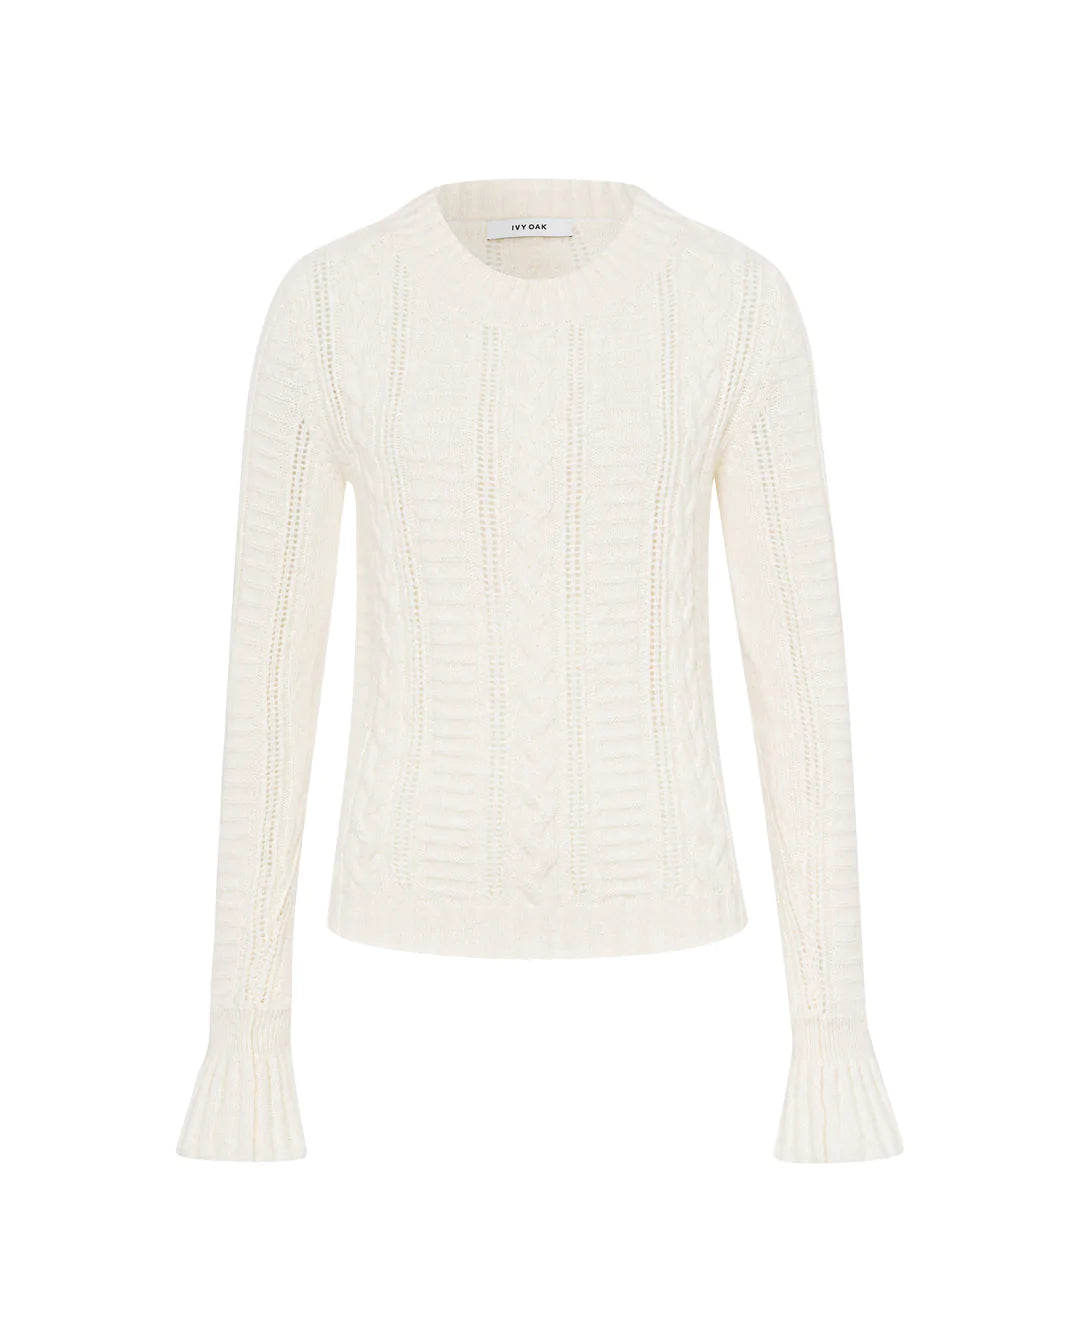 Katrina knitted jumper in white